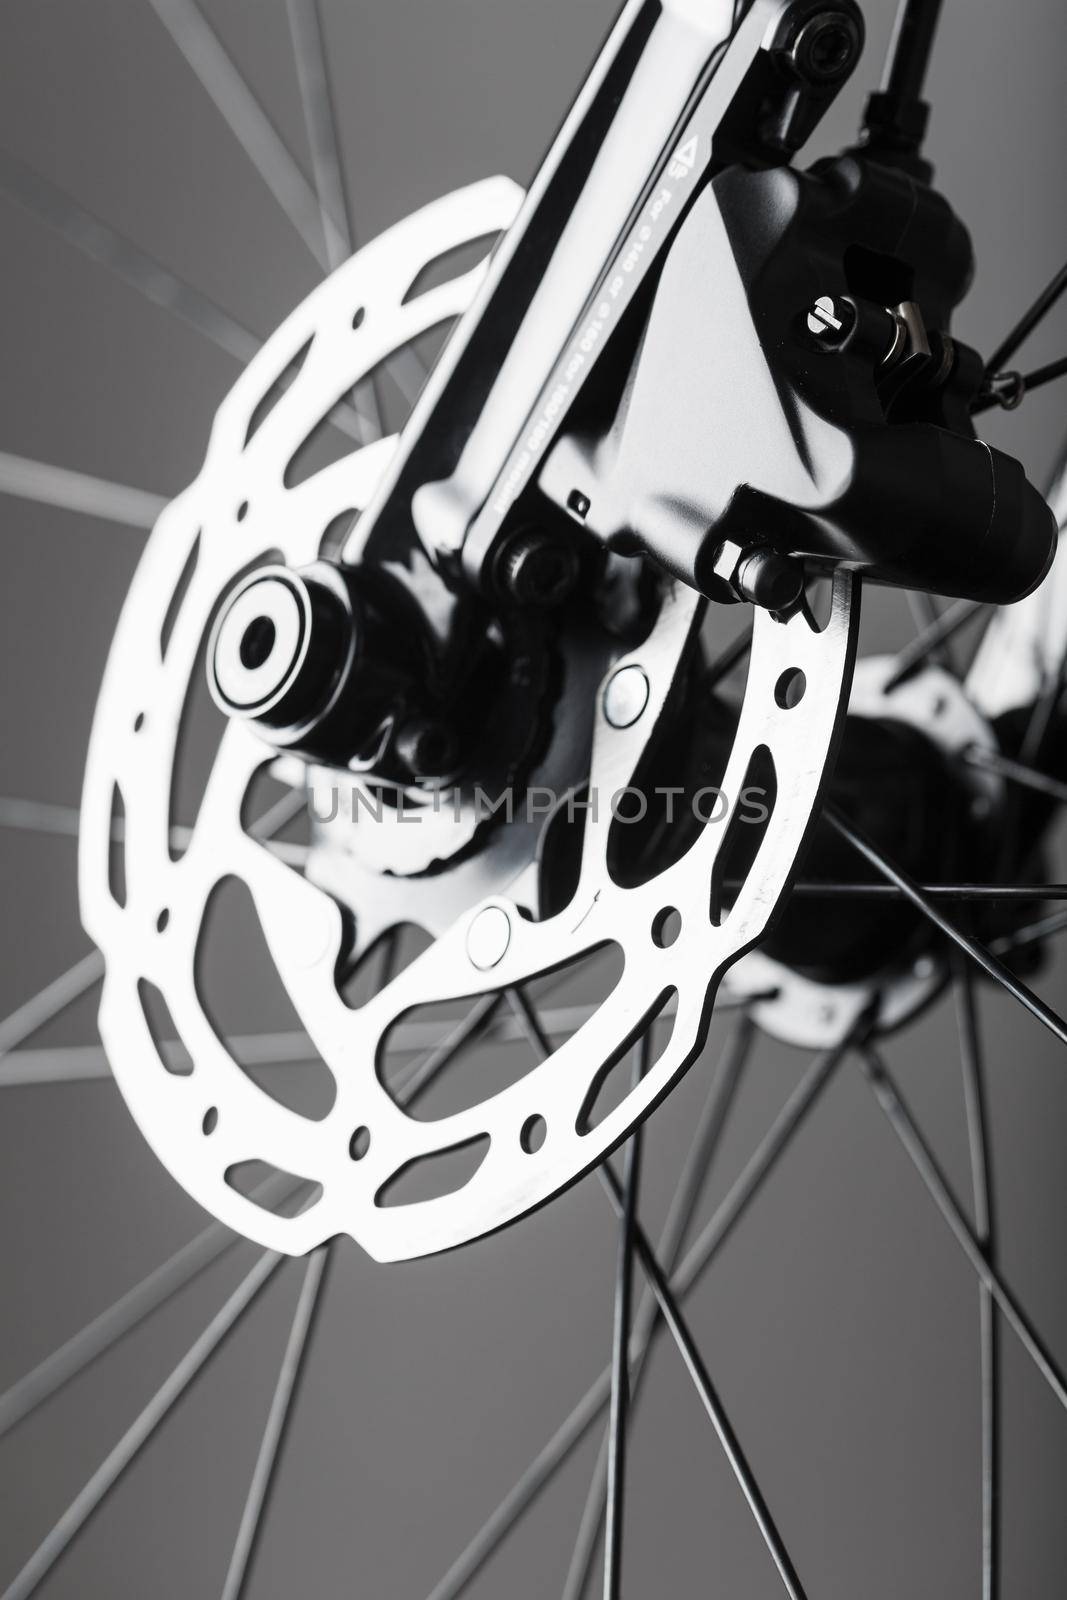 Bicycle Brake Rotor with Hydraulic Highway Braking System close-up